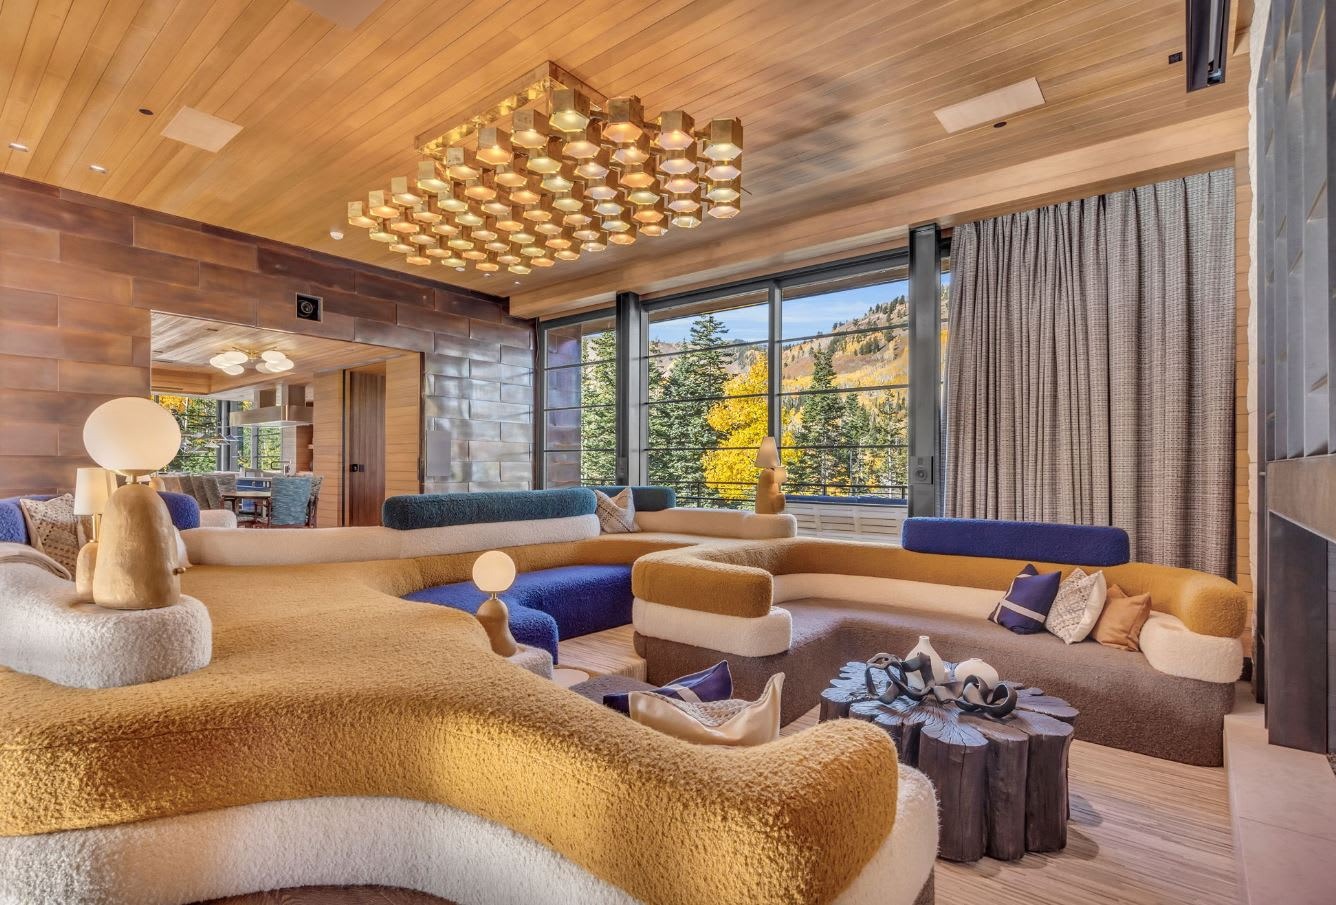 INSIDE THE MOST EXPENSIVE HOME IN PARK CITY - $50,000,000